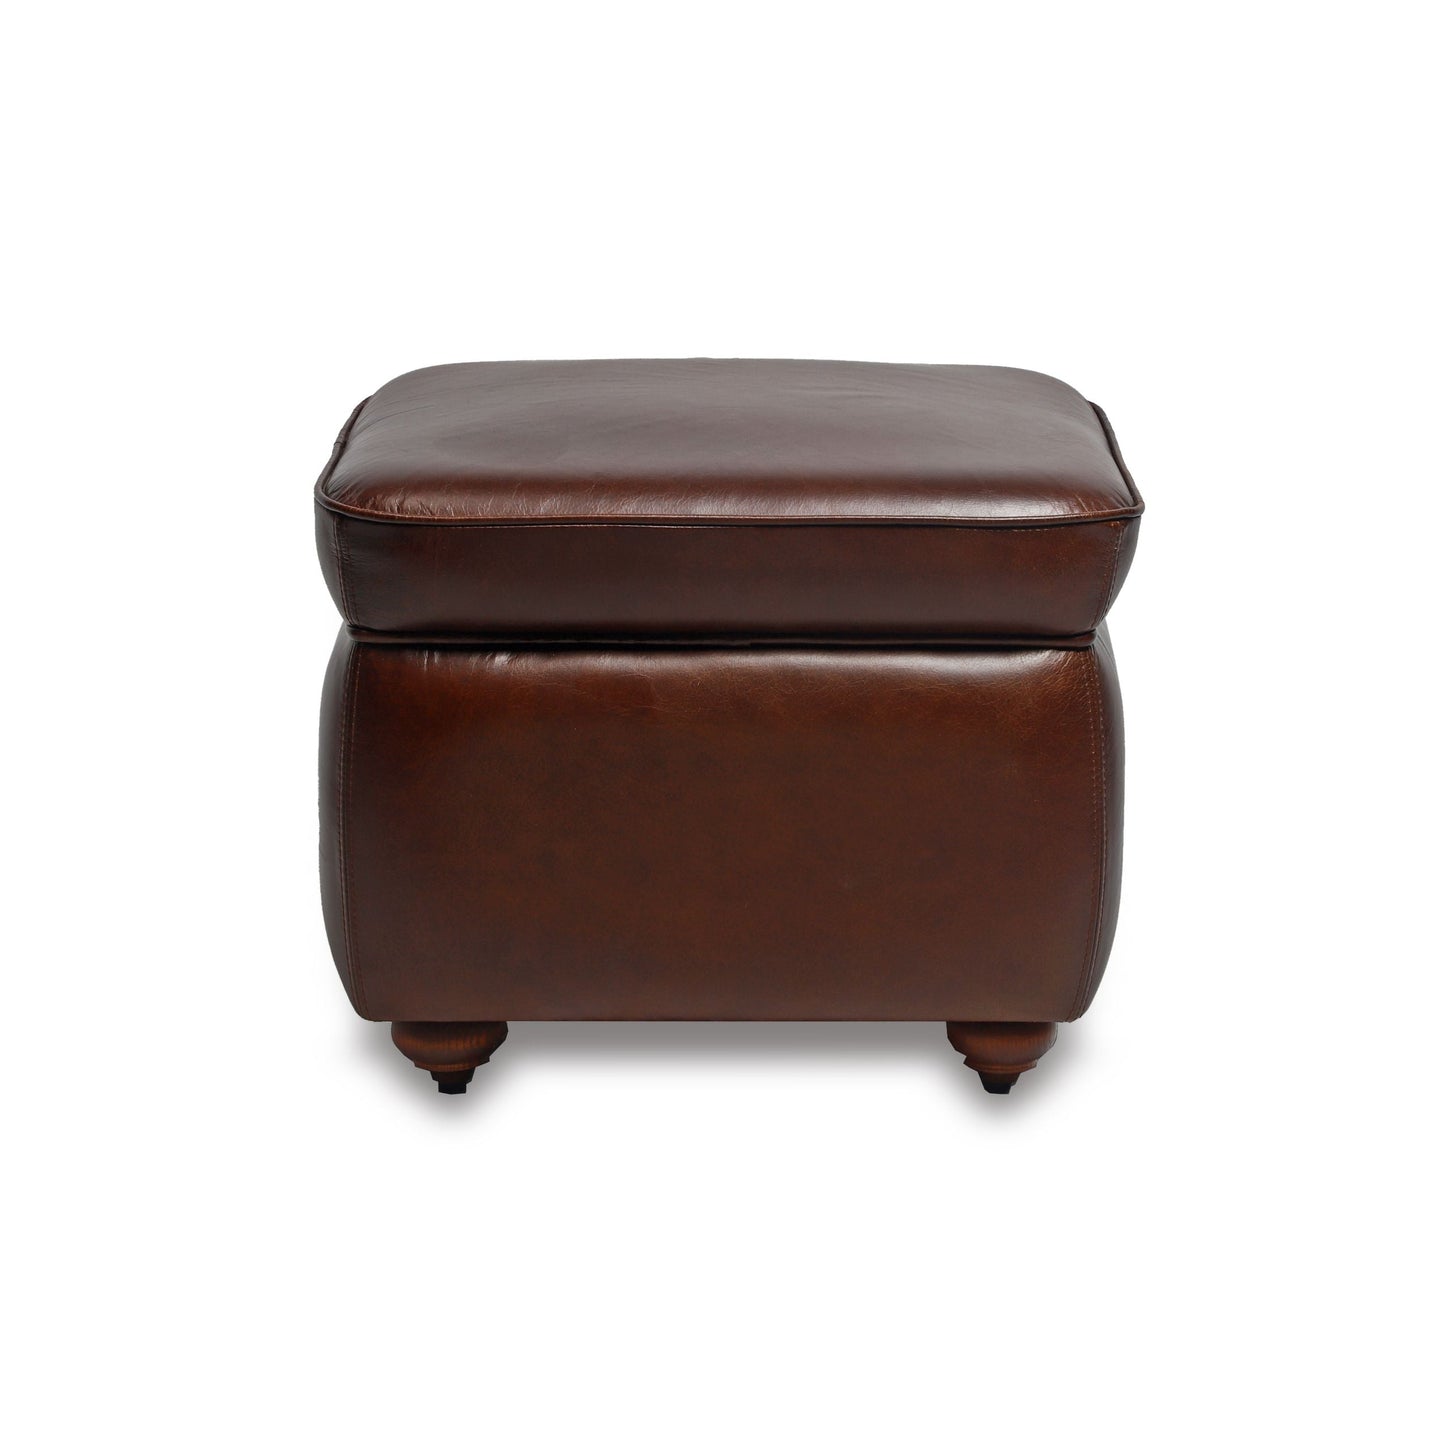 Genuine Leather Foot Stool In Brown Colour